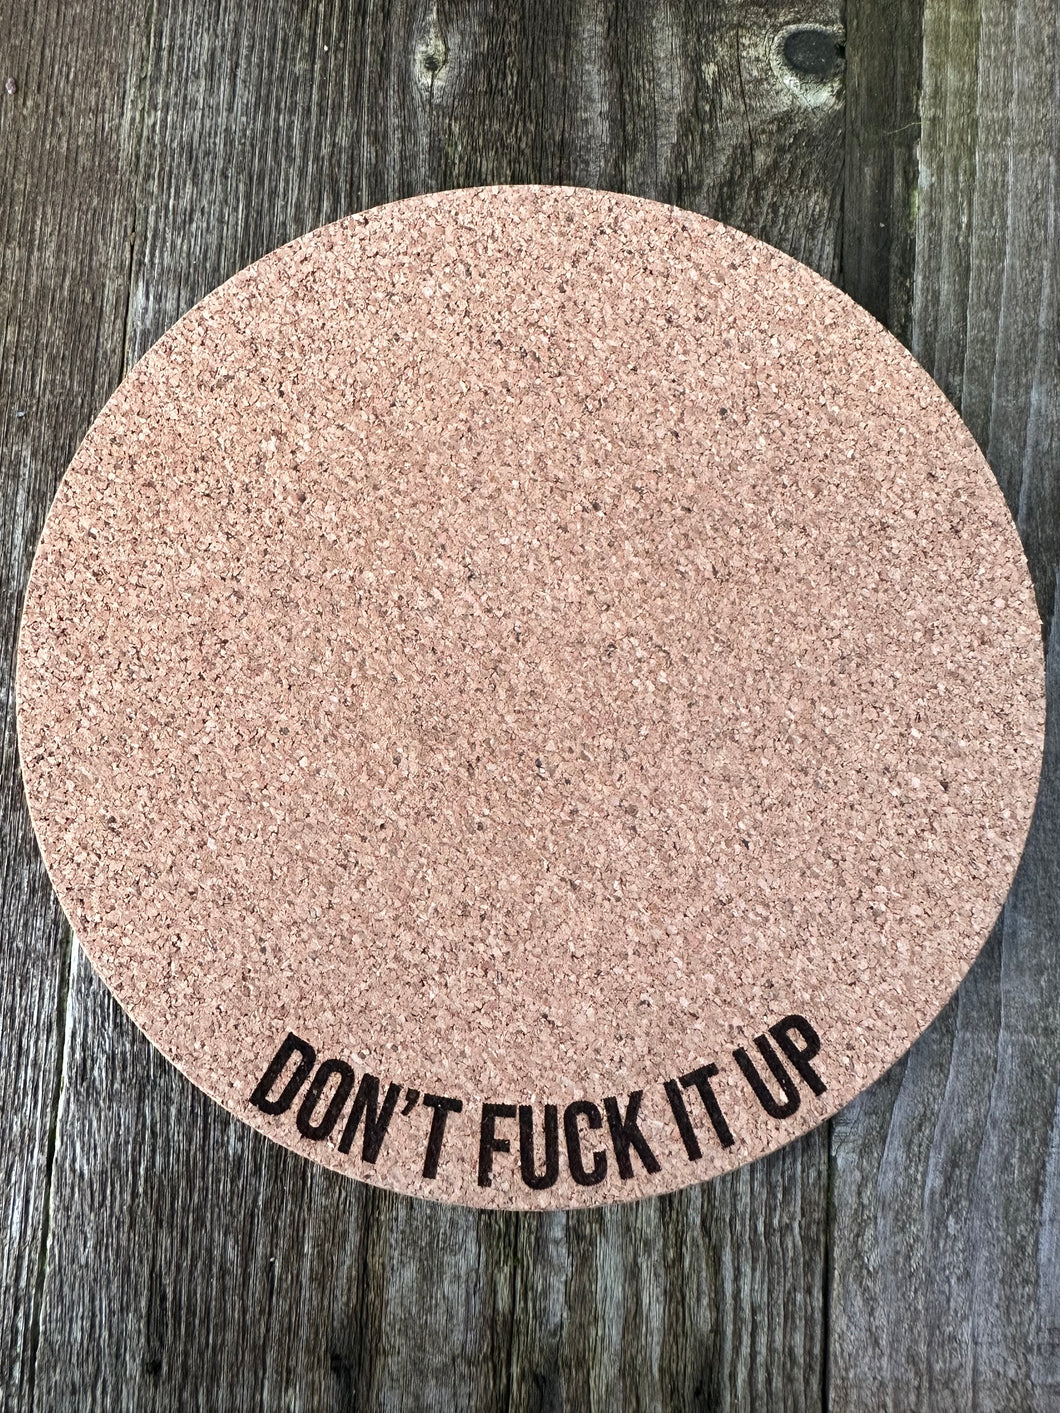 Don't Fuck It Up Cork Plant Mat - Engraved Cork Round - Cork Bottom - No Plastic or Rubber - All Natural Material